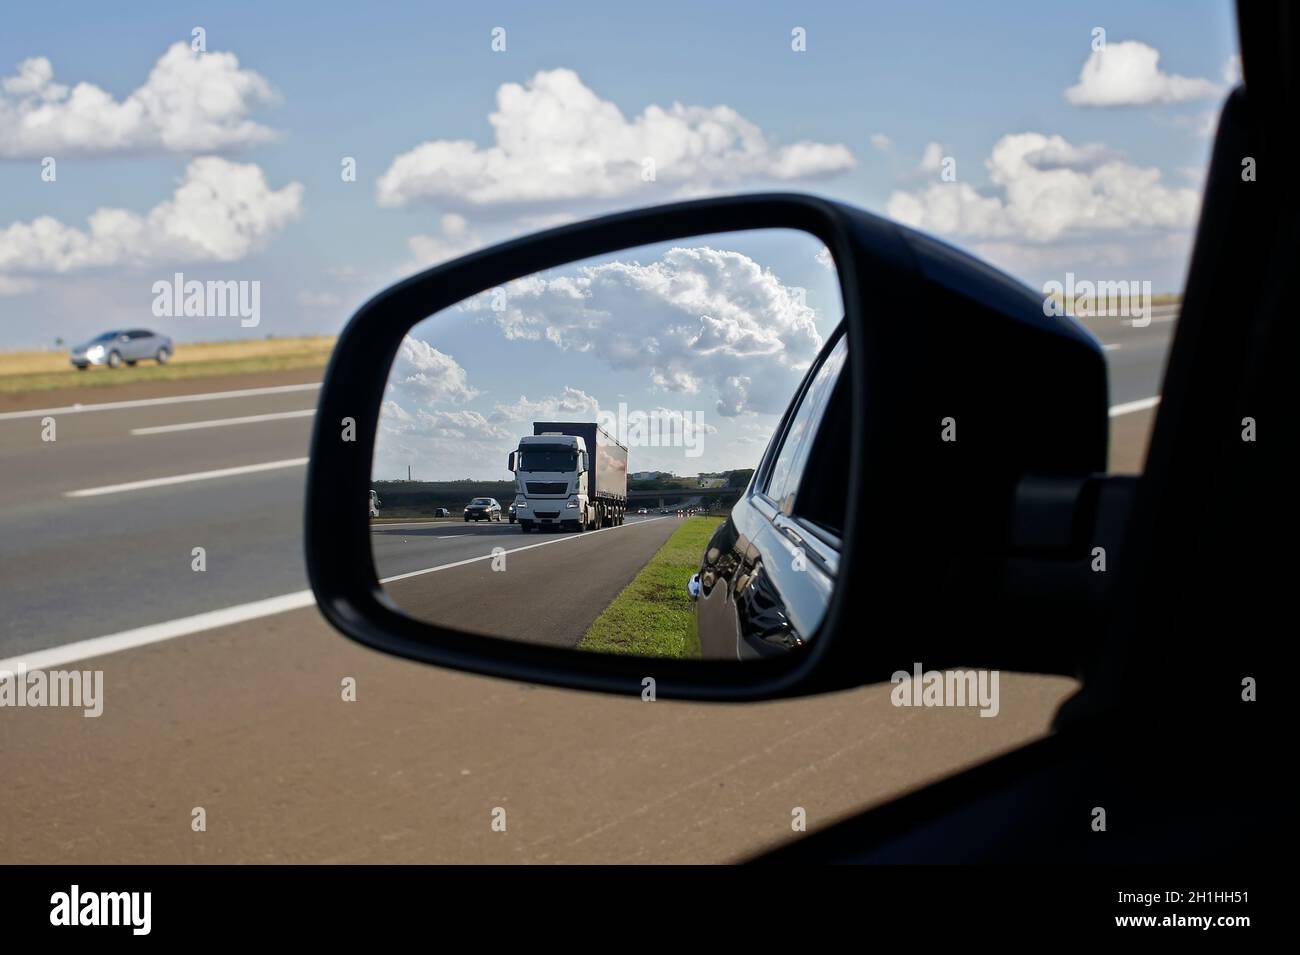 Truck on a highway seen in the rear view mirror on a summer day. Stock Photo